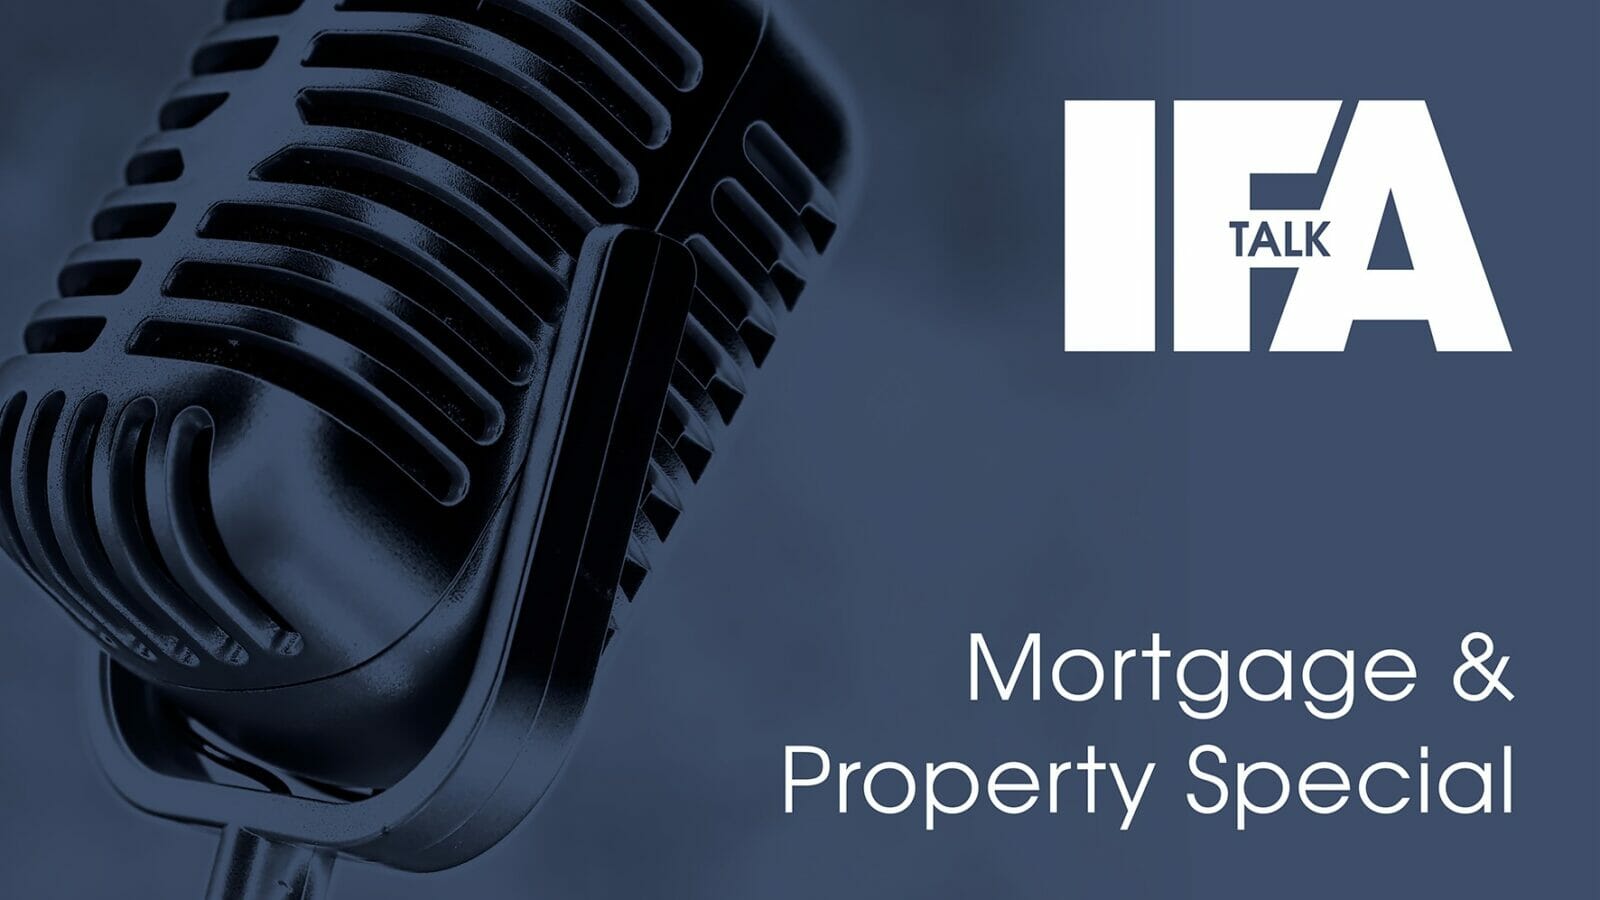 M&P Podcast #9: The role of building societies in the specialist lending market